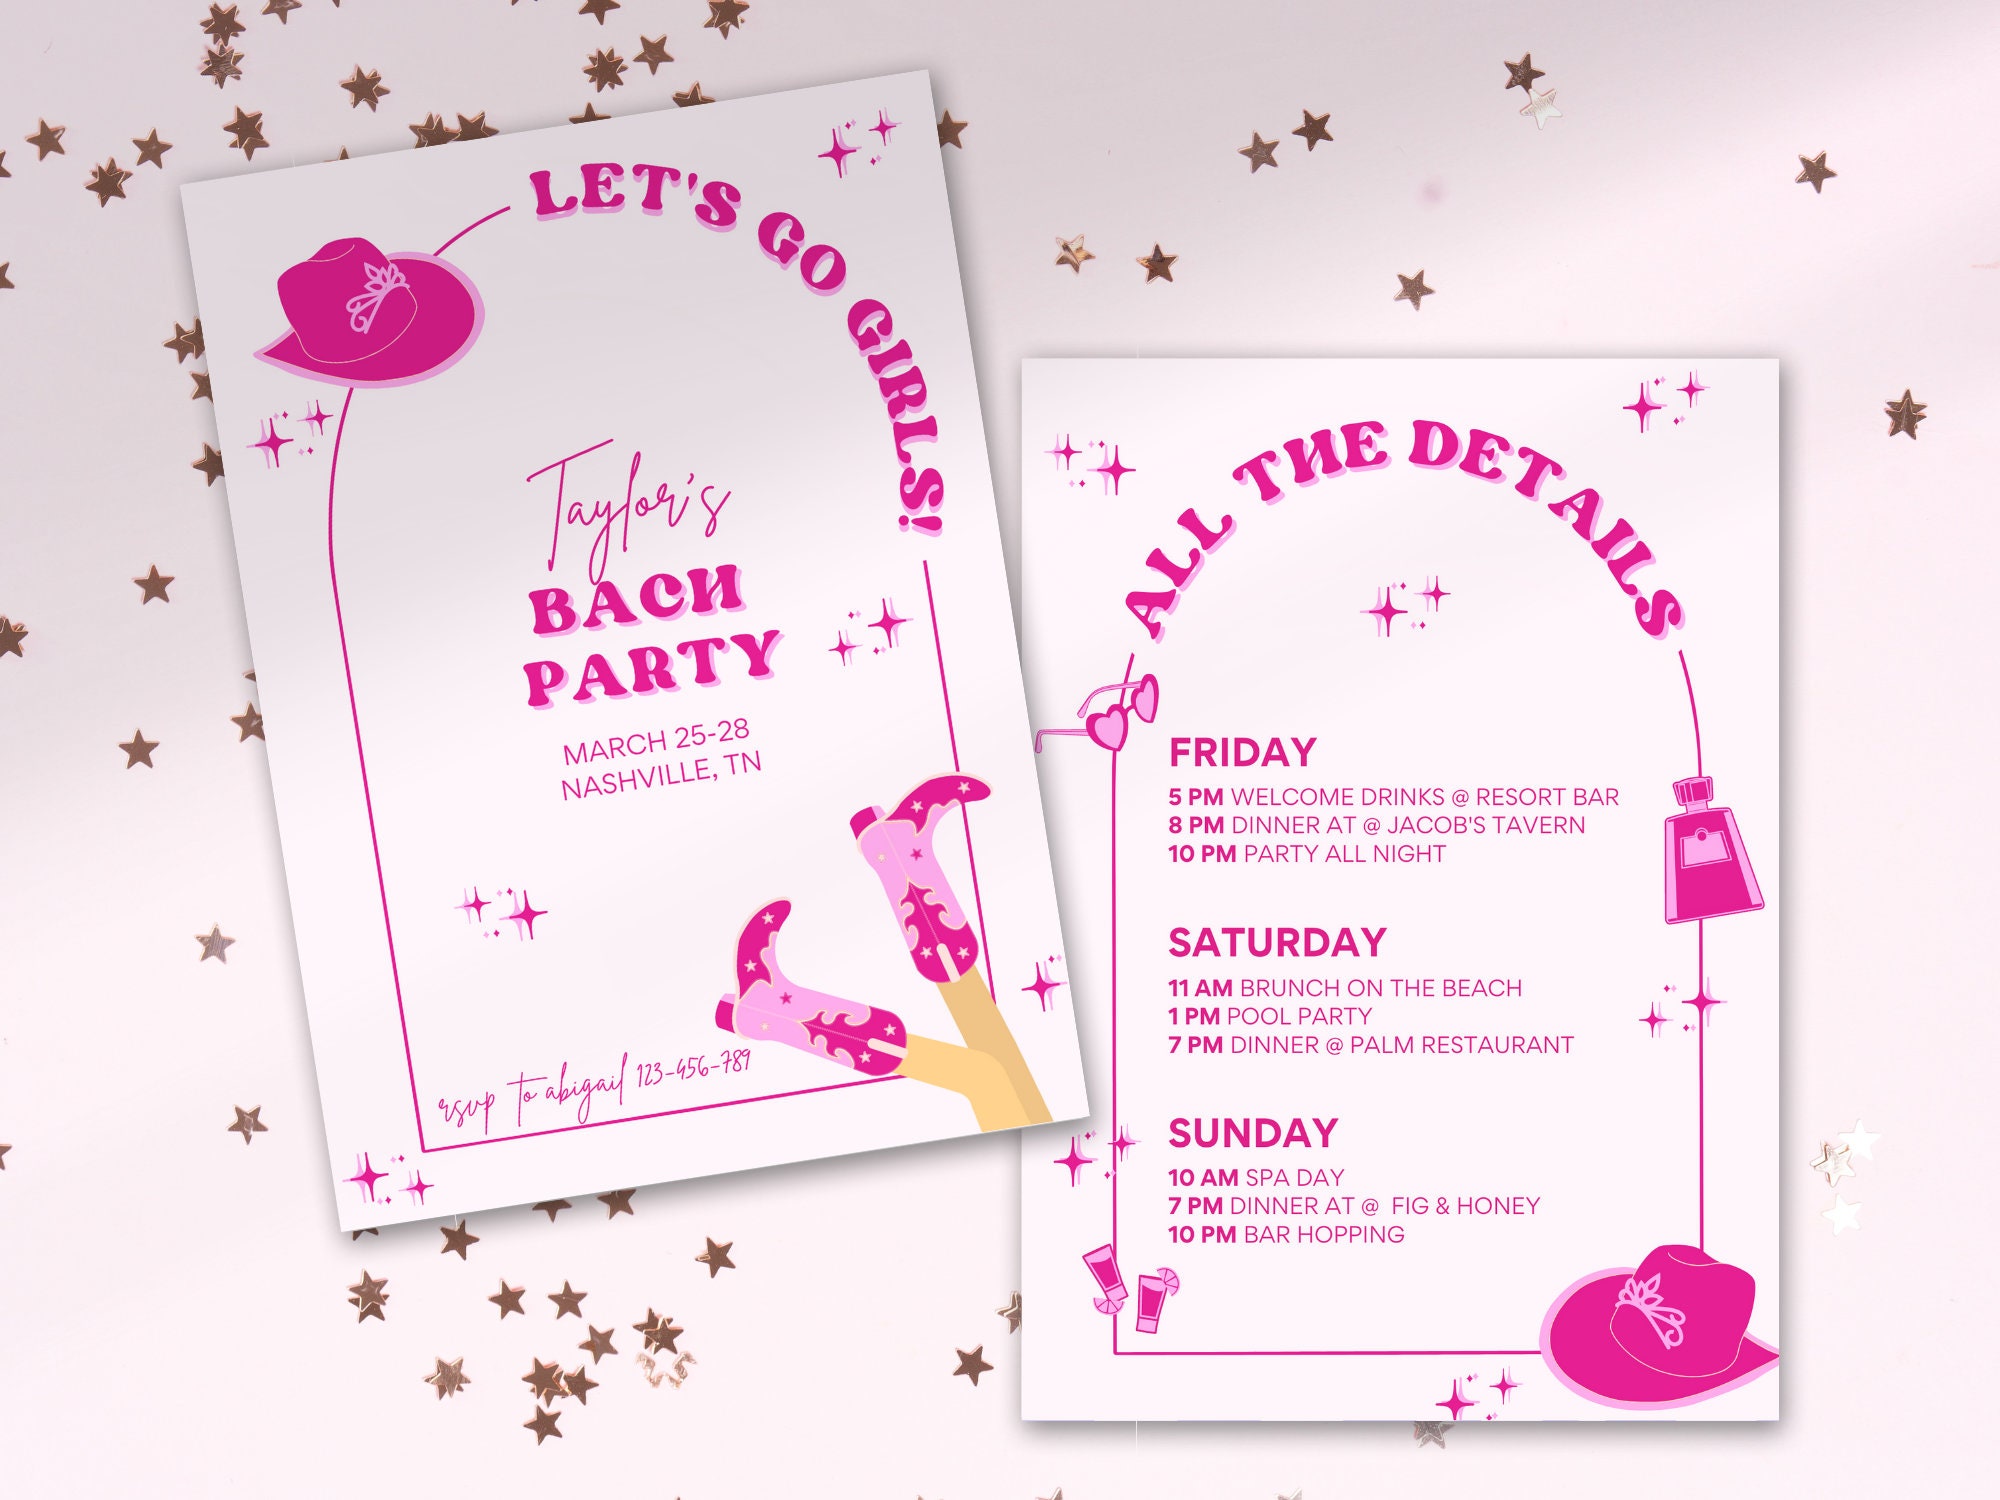 Cowgirl Bachelorette Party Invitation & Itinerary Template - Etsy